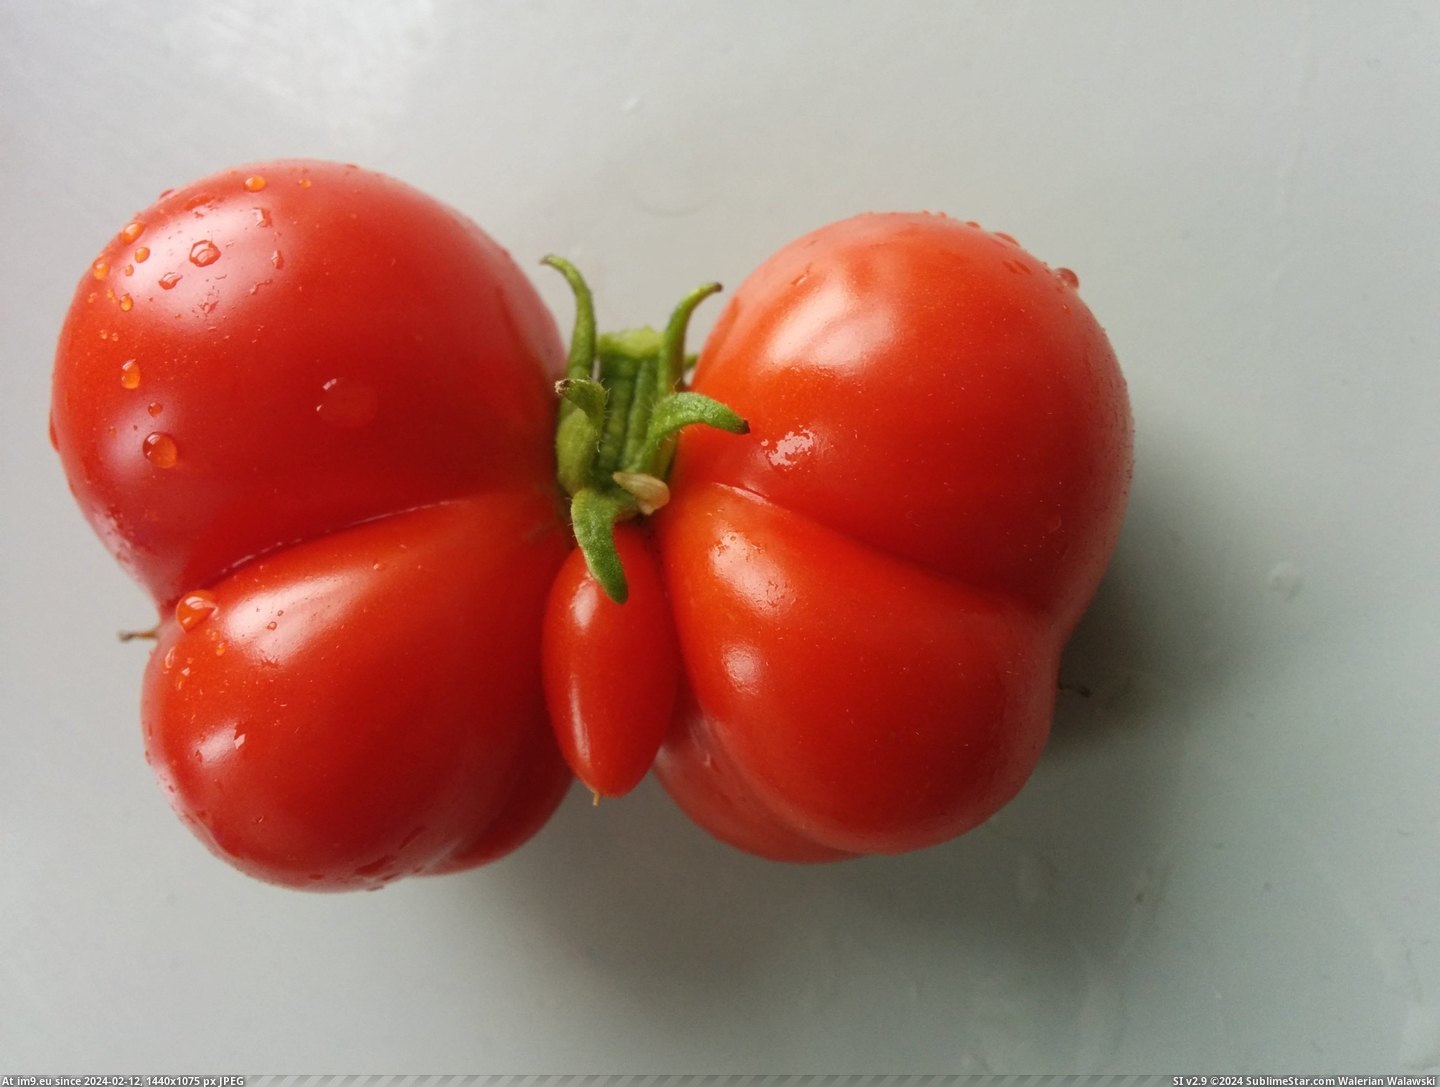 [Mildlyinteresting] This tomato that grew in our garden is shaped like a butterfly (in My r/MILDLYINTERESTING favs)